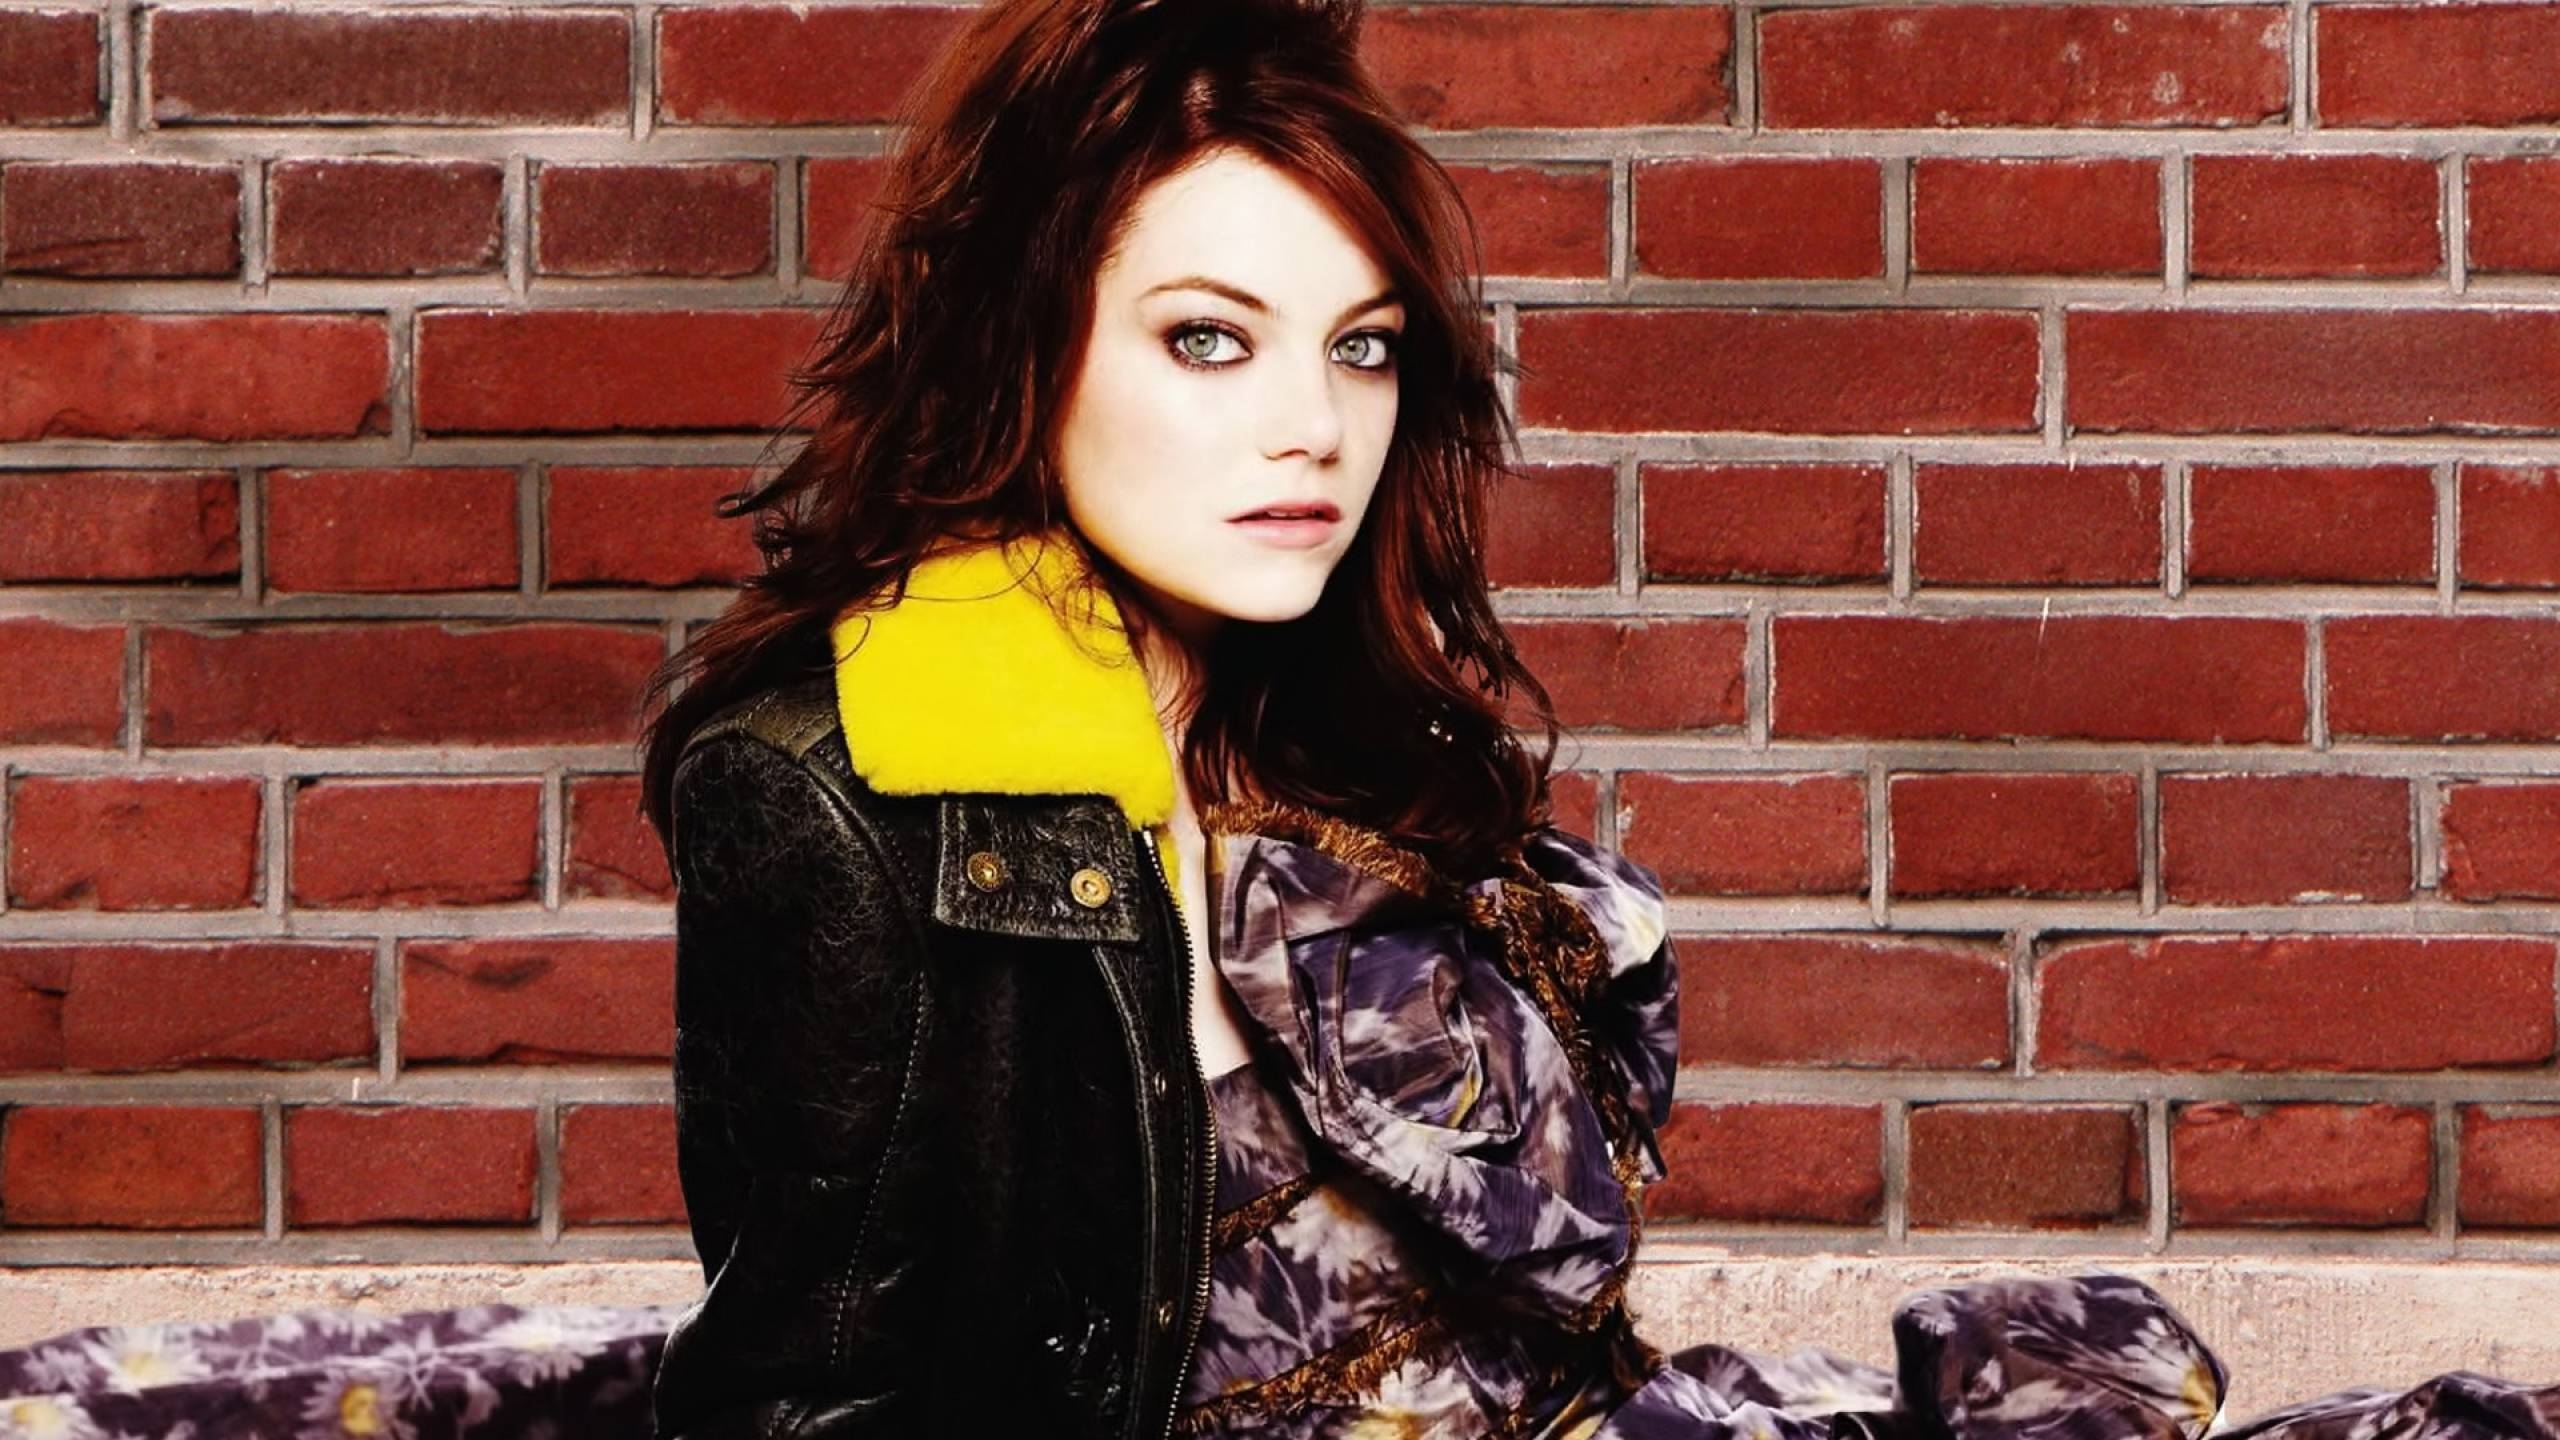 Young Emma Stone for 2560x1440 HDTV resolution